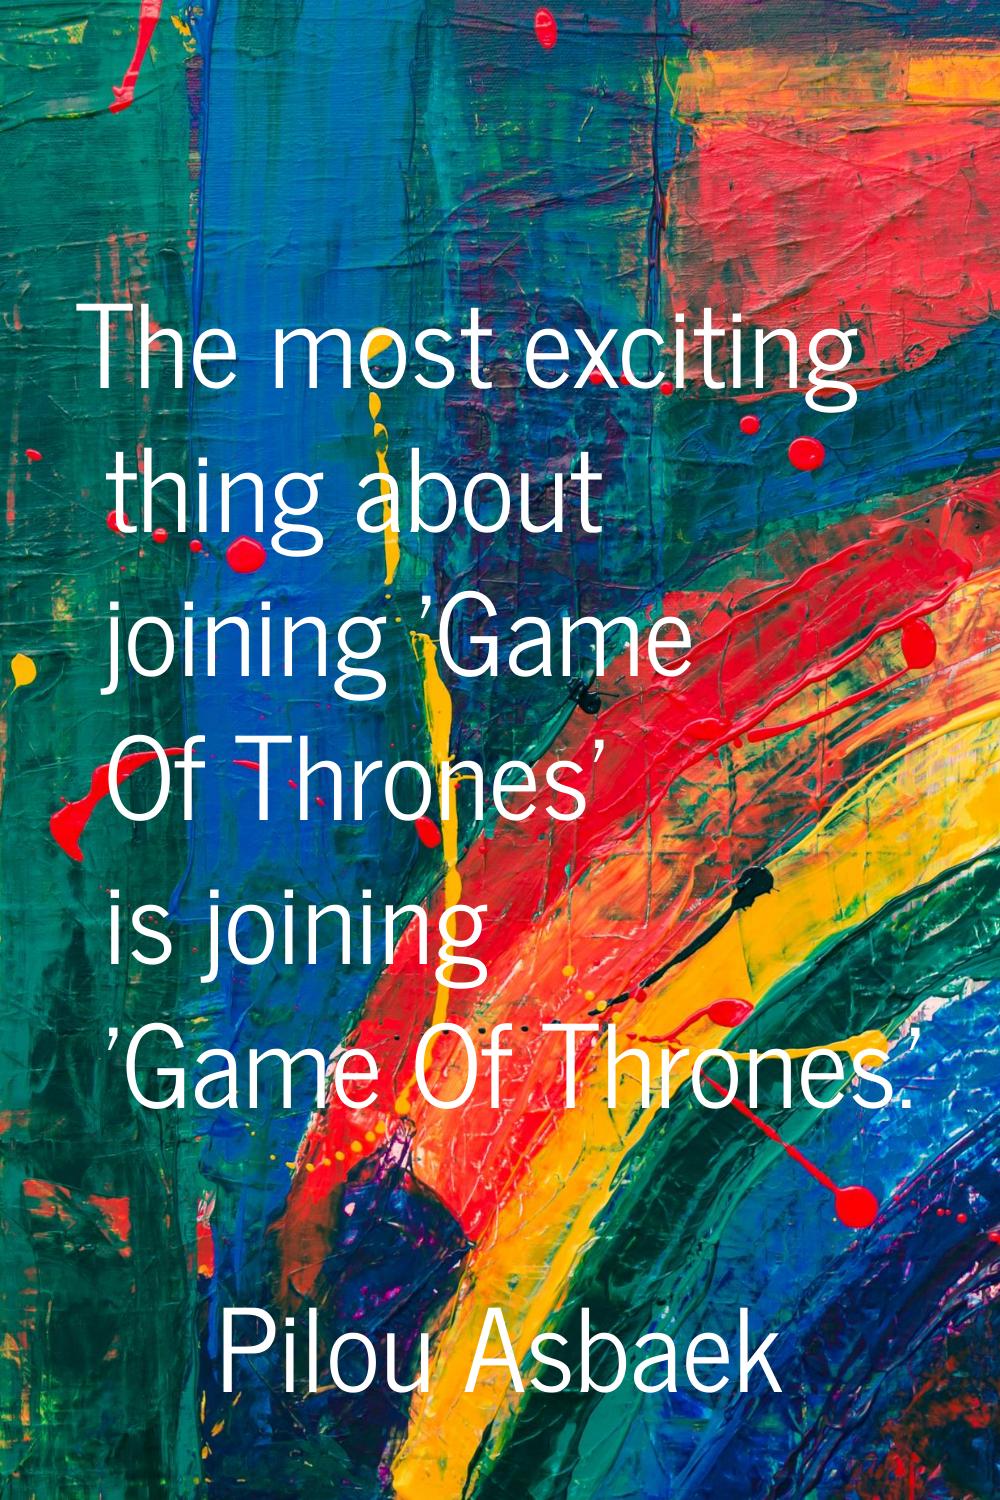 The most exciting thing about joining 'Game Of Thrones' is joining 'Game Of Thrones.'